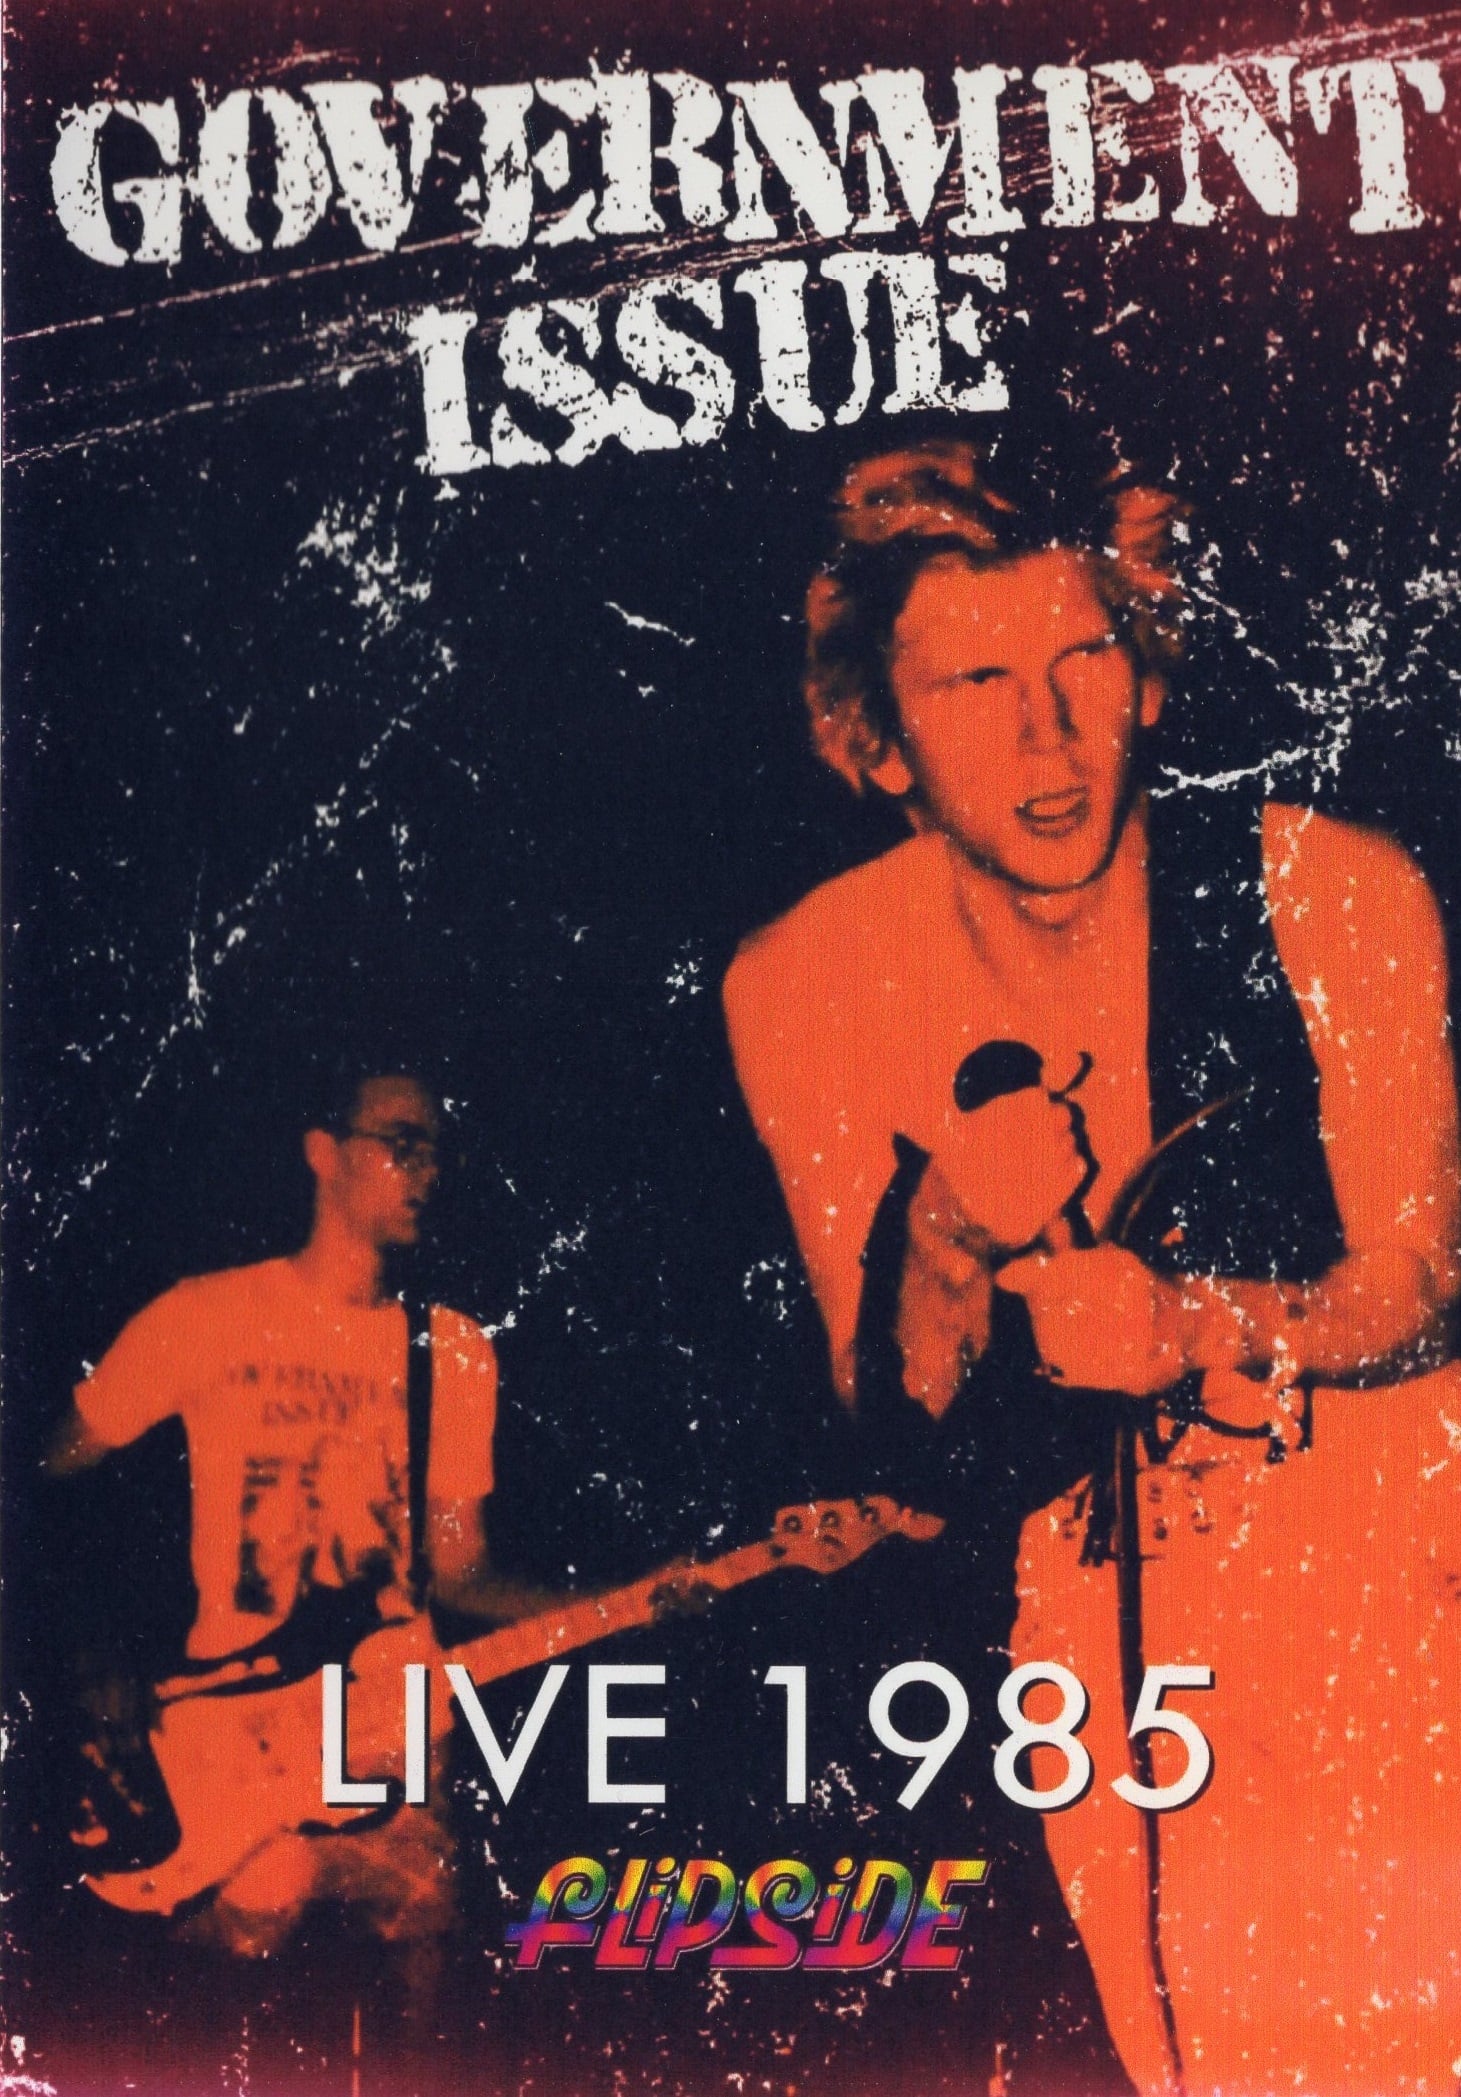 Government Issue: Live in 1985